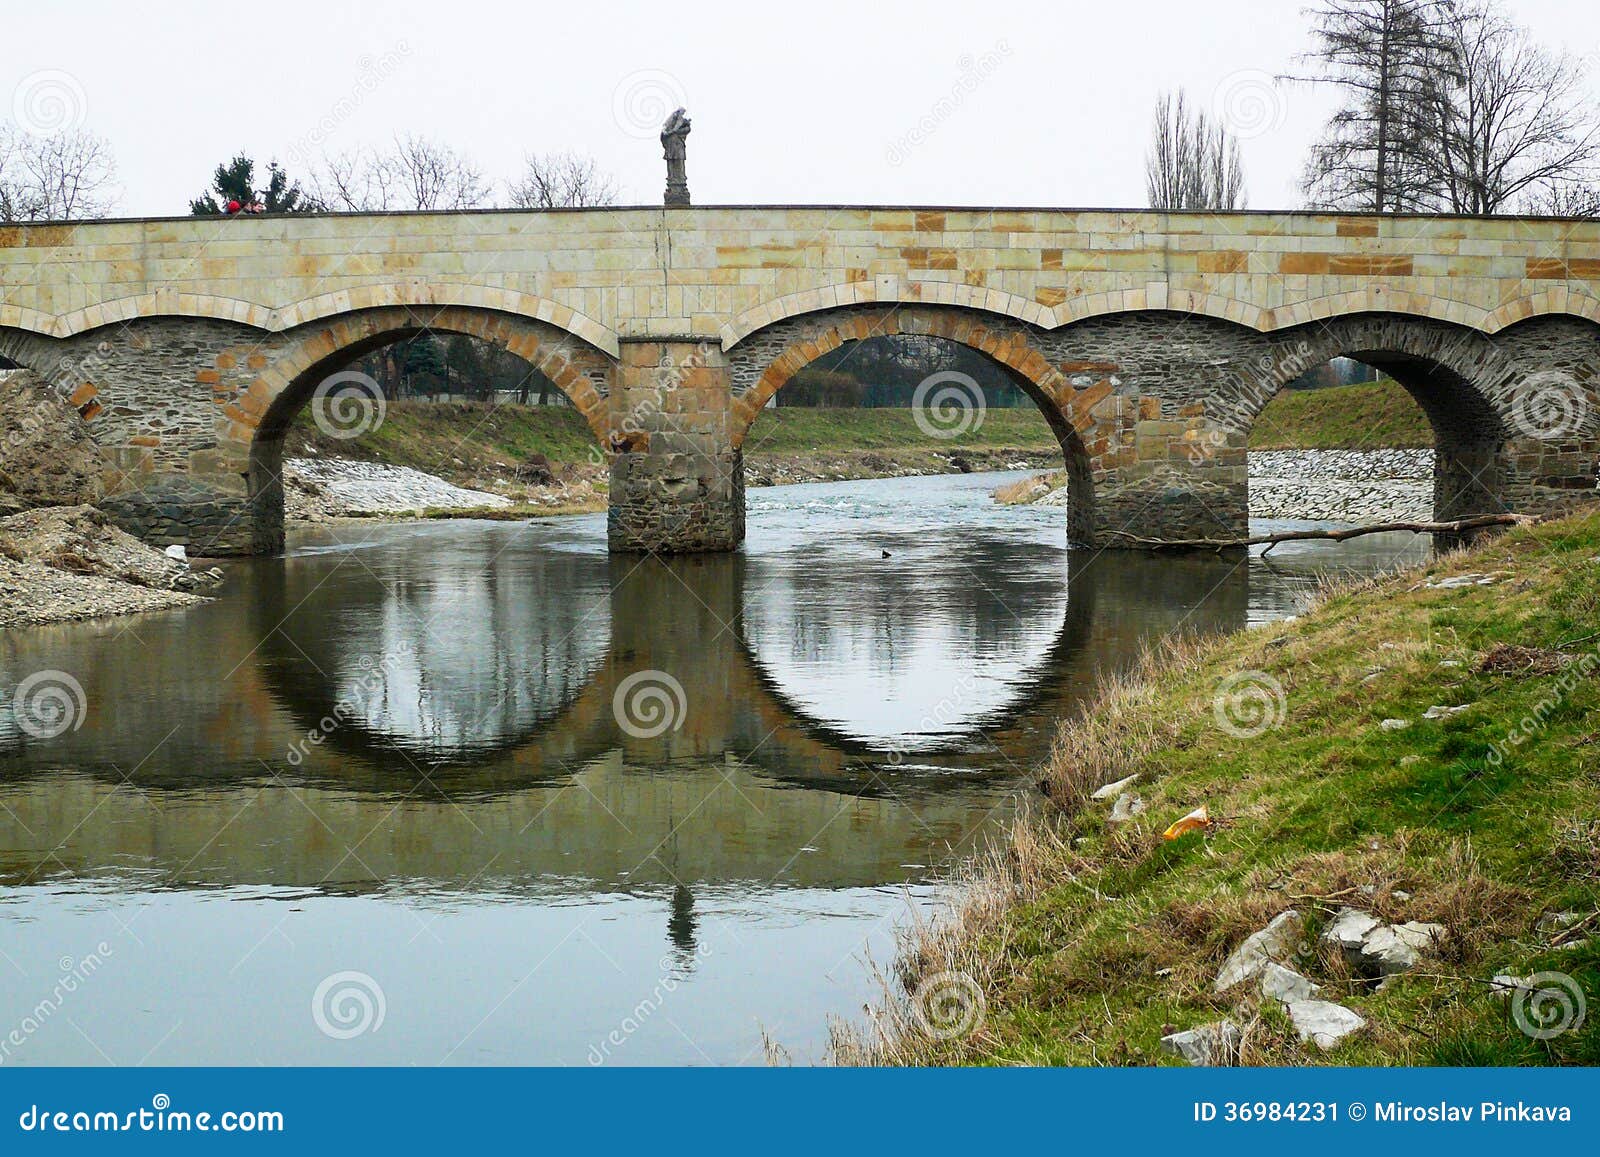 stone bridge with the statue of st. john of nepomuk in litovel